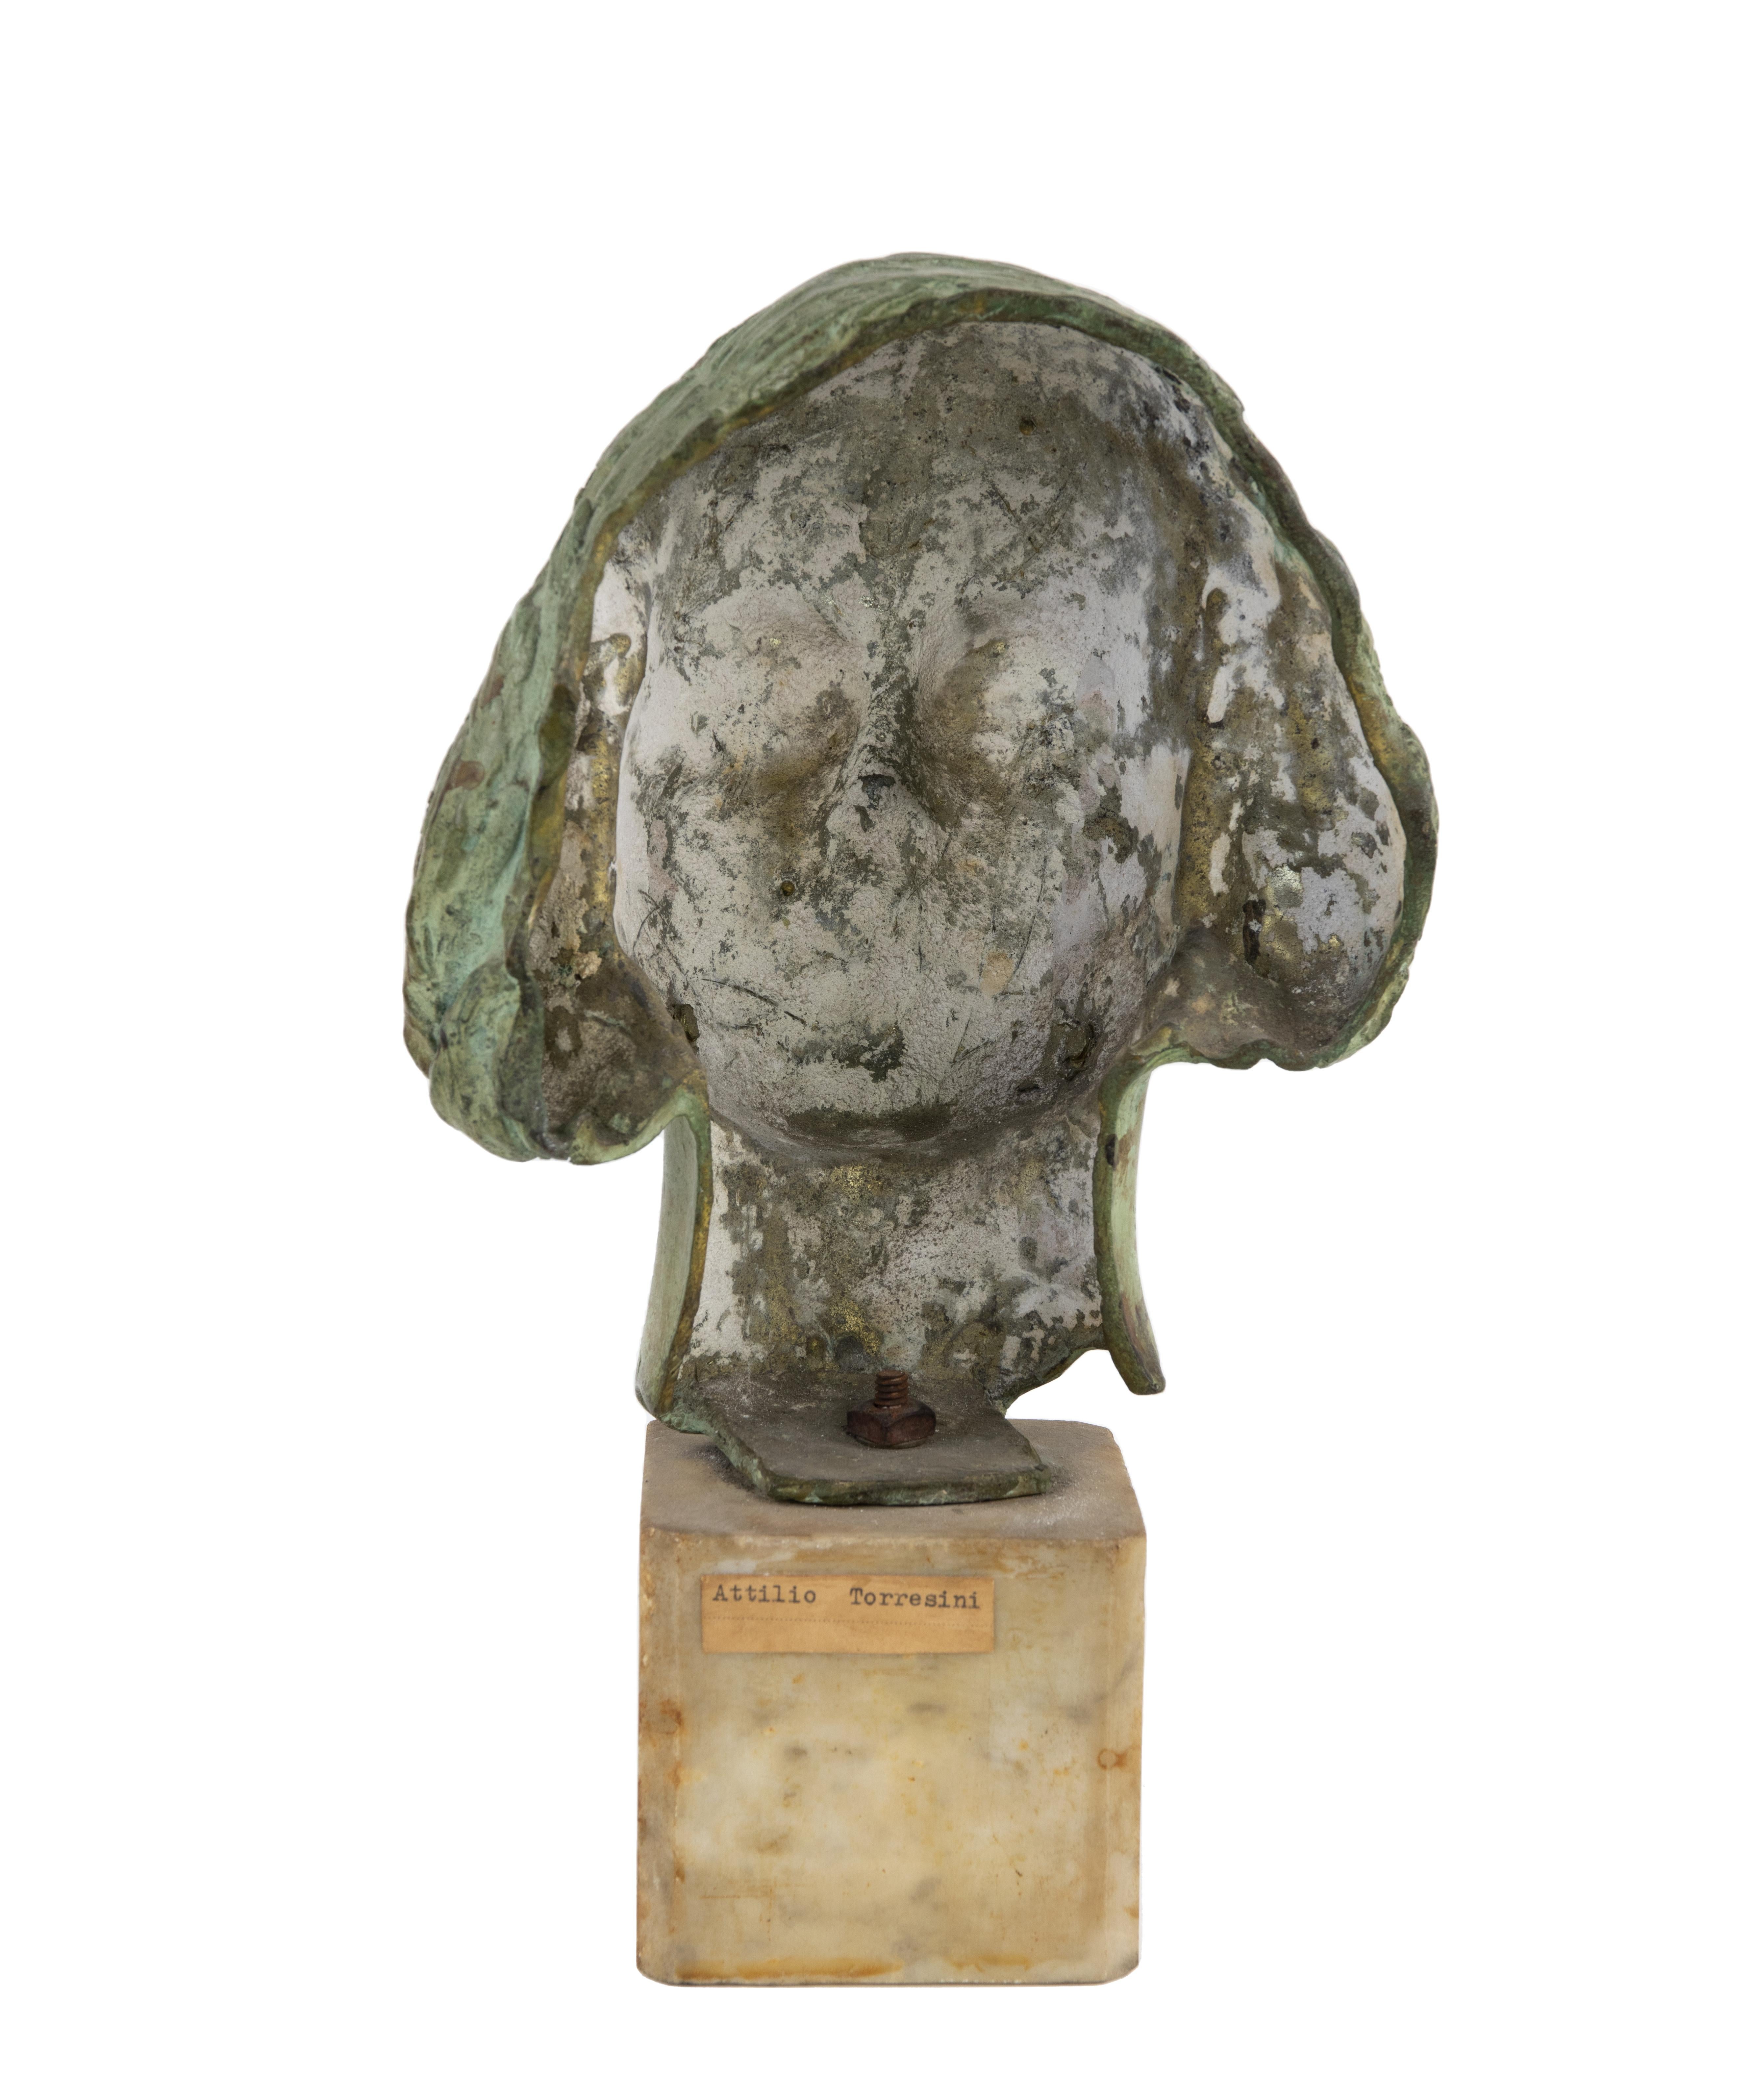 Italian Young Girl Bust Statue by Attilio Torresini, Italy, 1930s For Sale